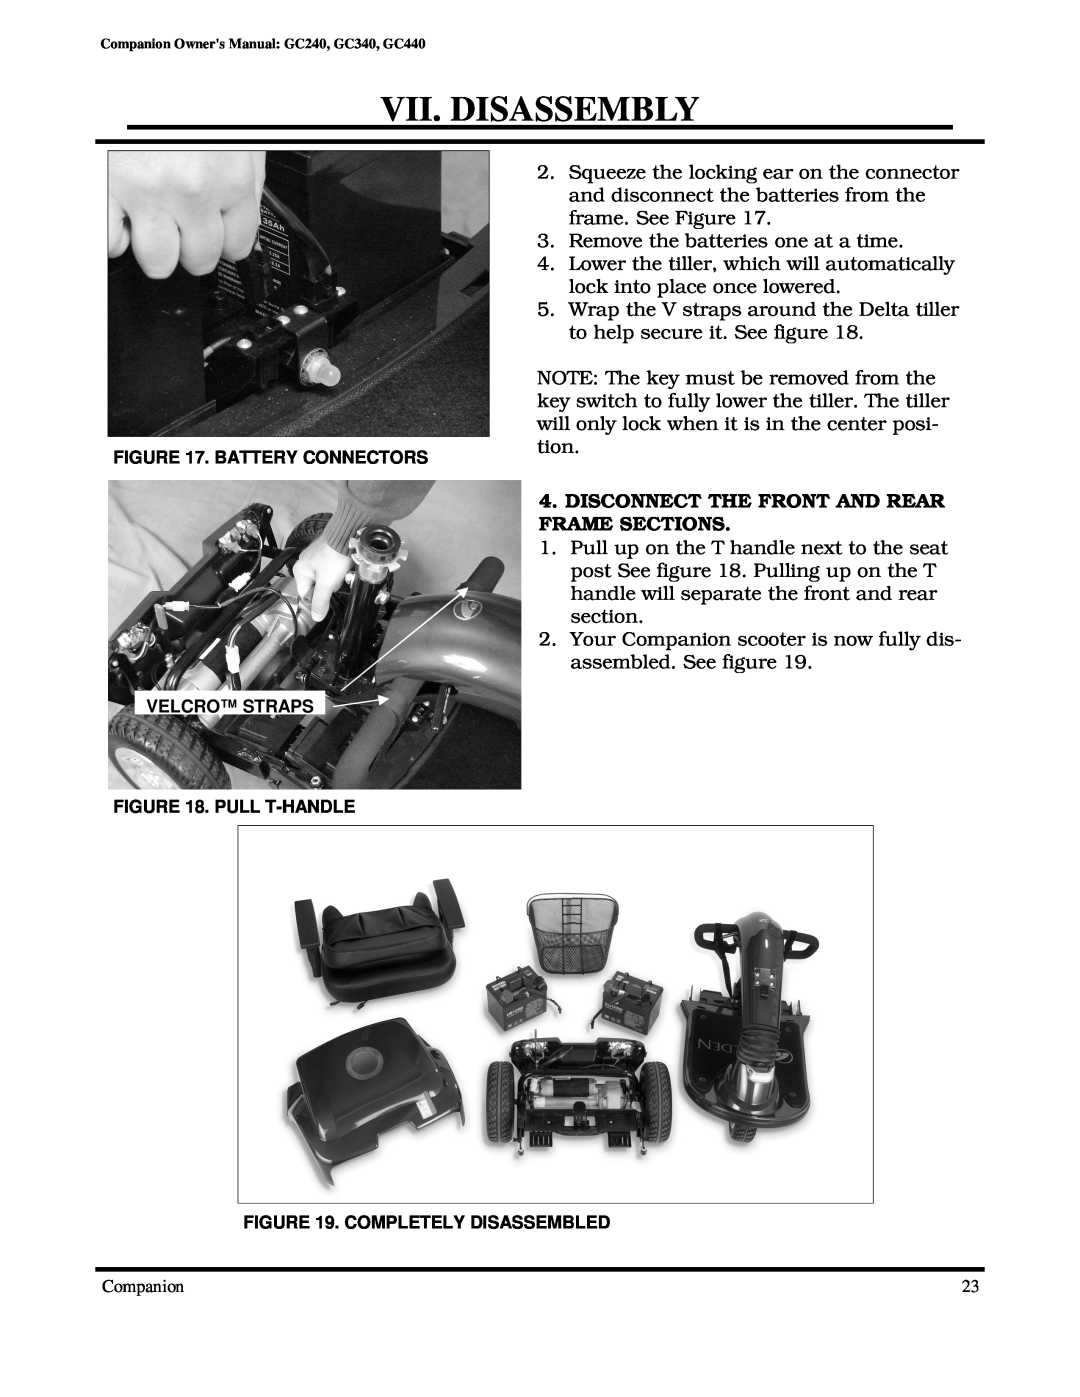 Golden Technologies GC440, GC240, GC340 owner manual Vii. Disassembly, Disconnect The Front And Rear Frame Sections 